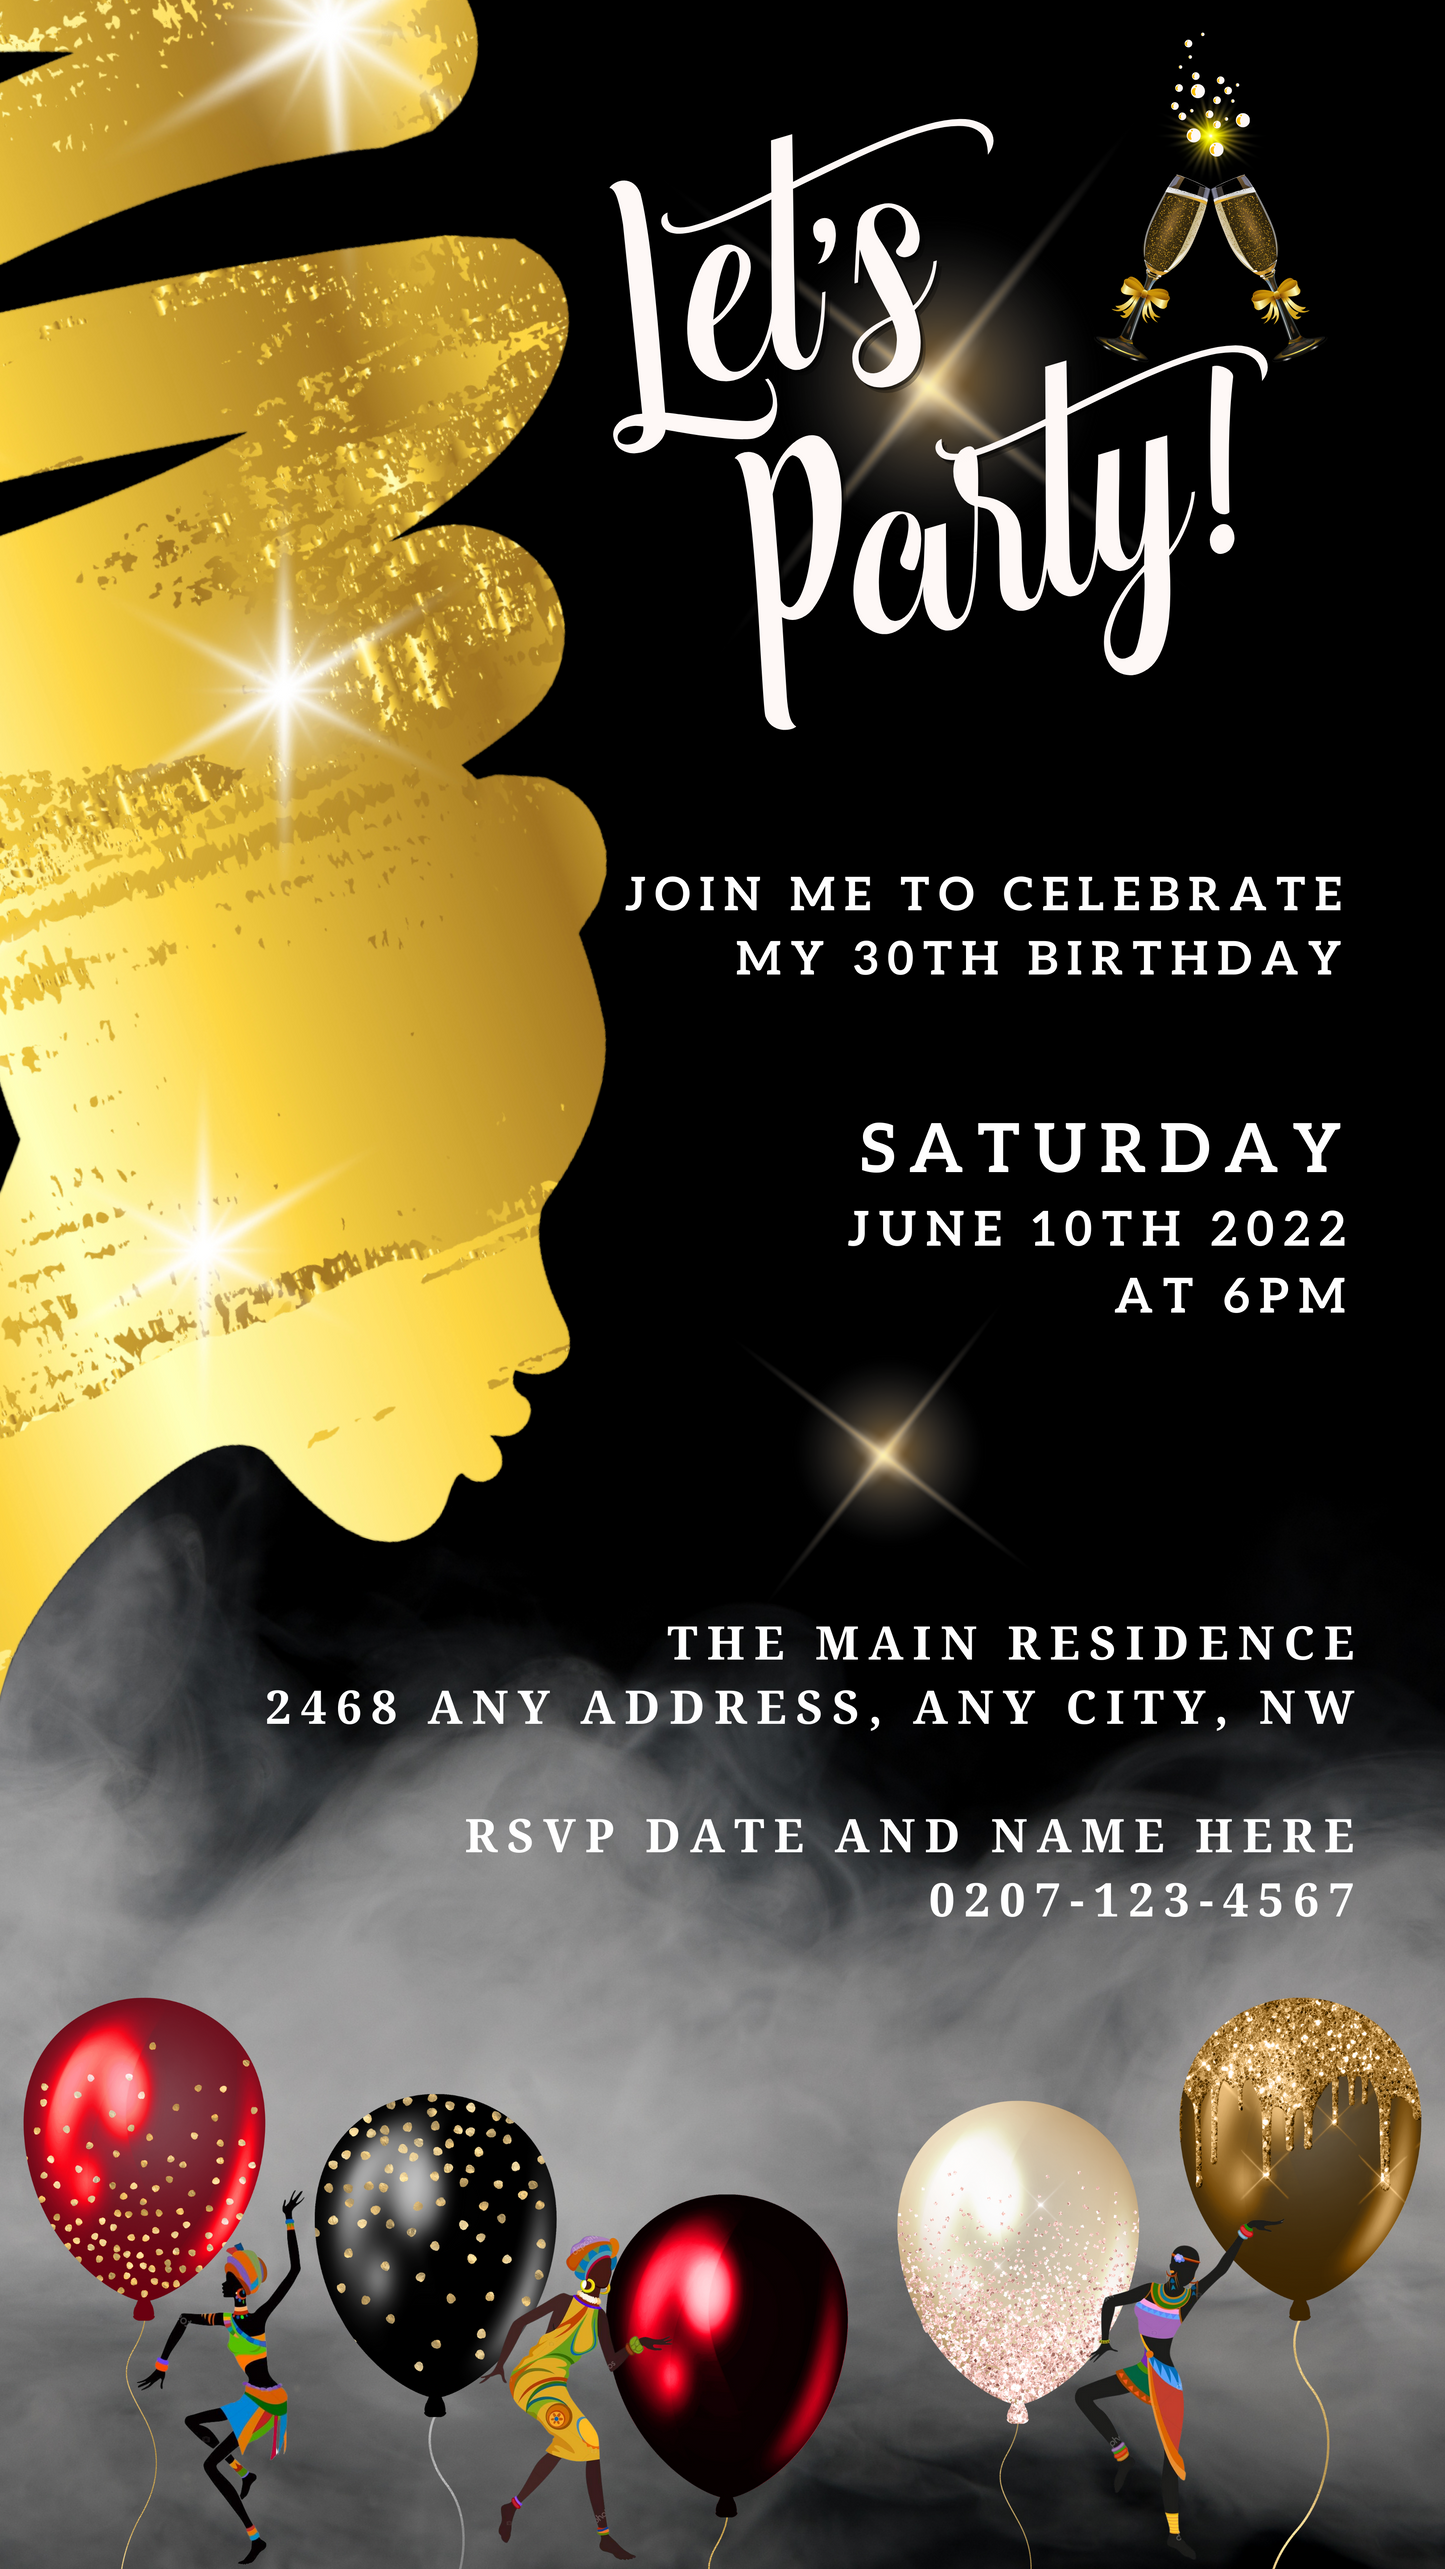 Black and gold invitation featuring an African woman silhouette for customizable digital party evites, editable via Canva for smartphones.